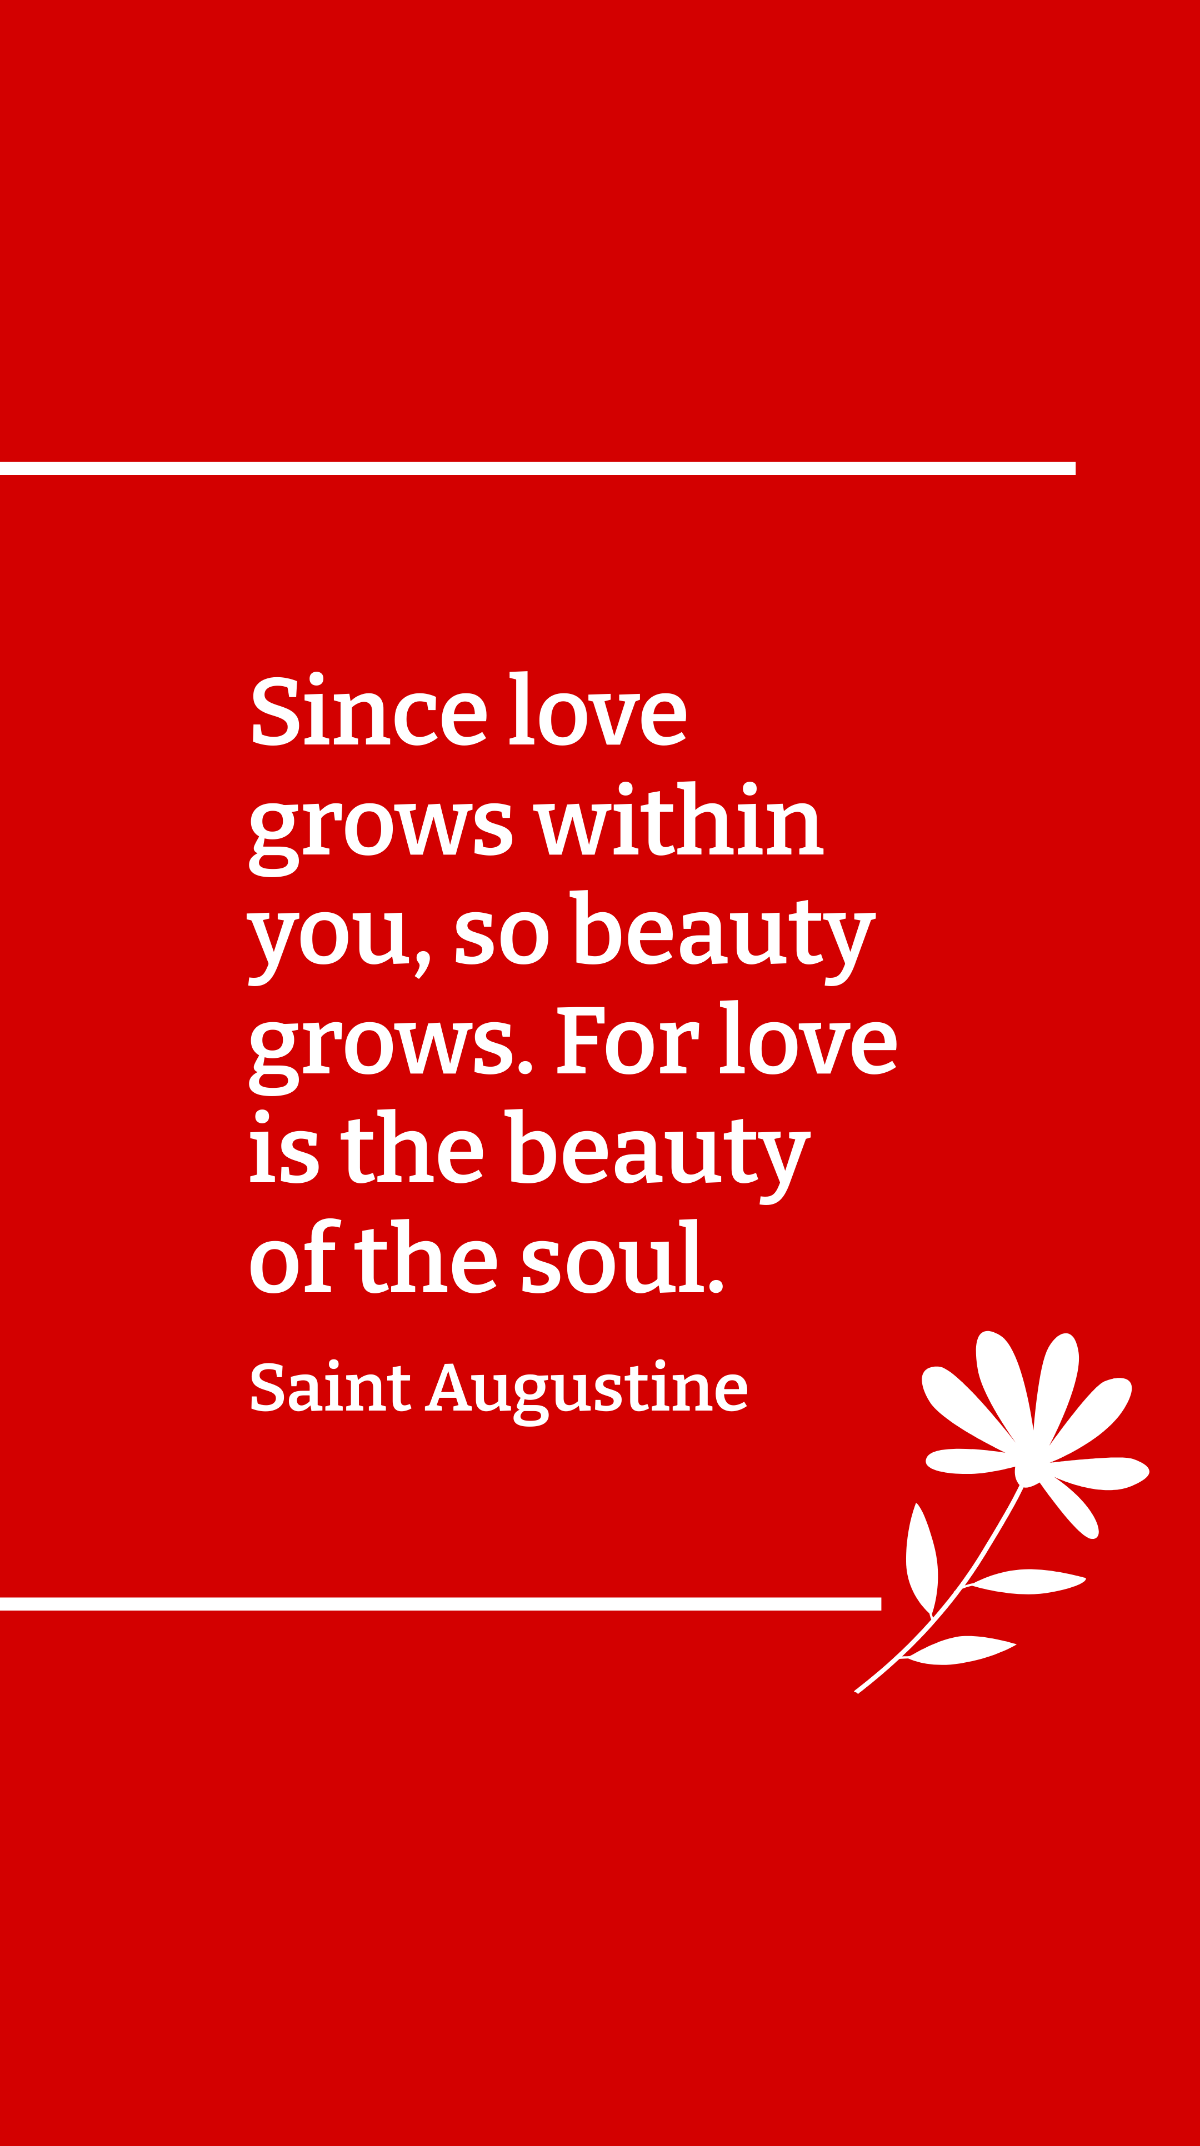 Saint Augustine - Since love grows within you, so beauty grows. For love is the beauty of the soul.